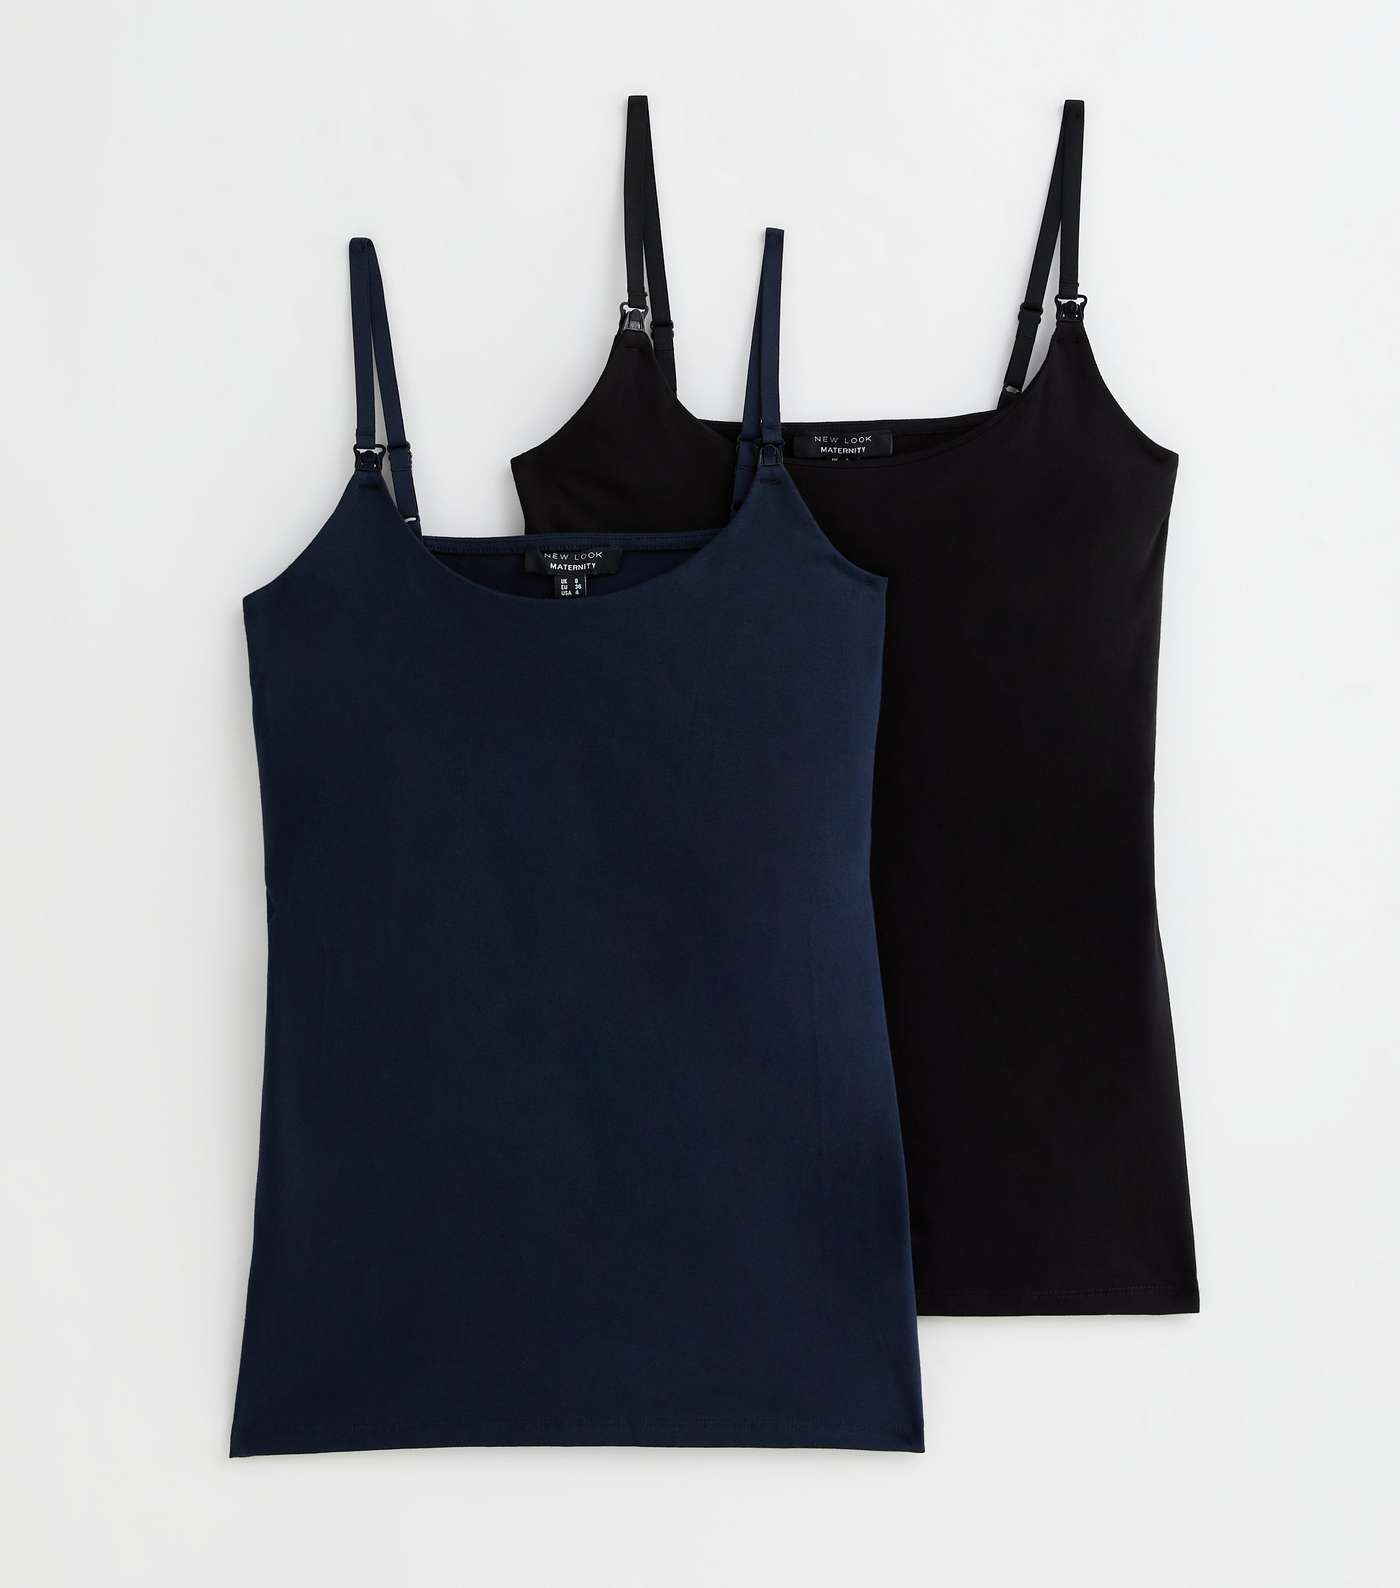 Maternity 2 Pack Black and Navy Jersey Nursing Cami Tops Image 5